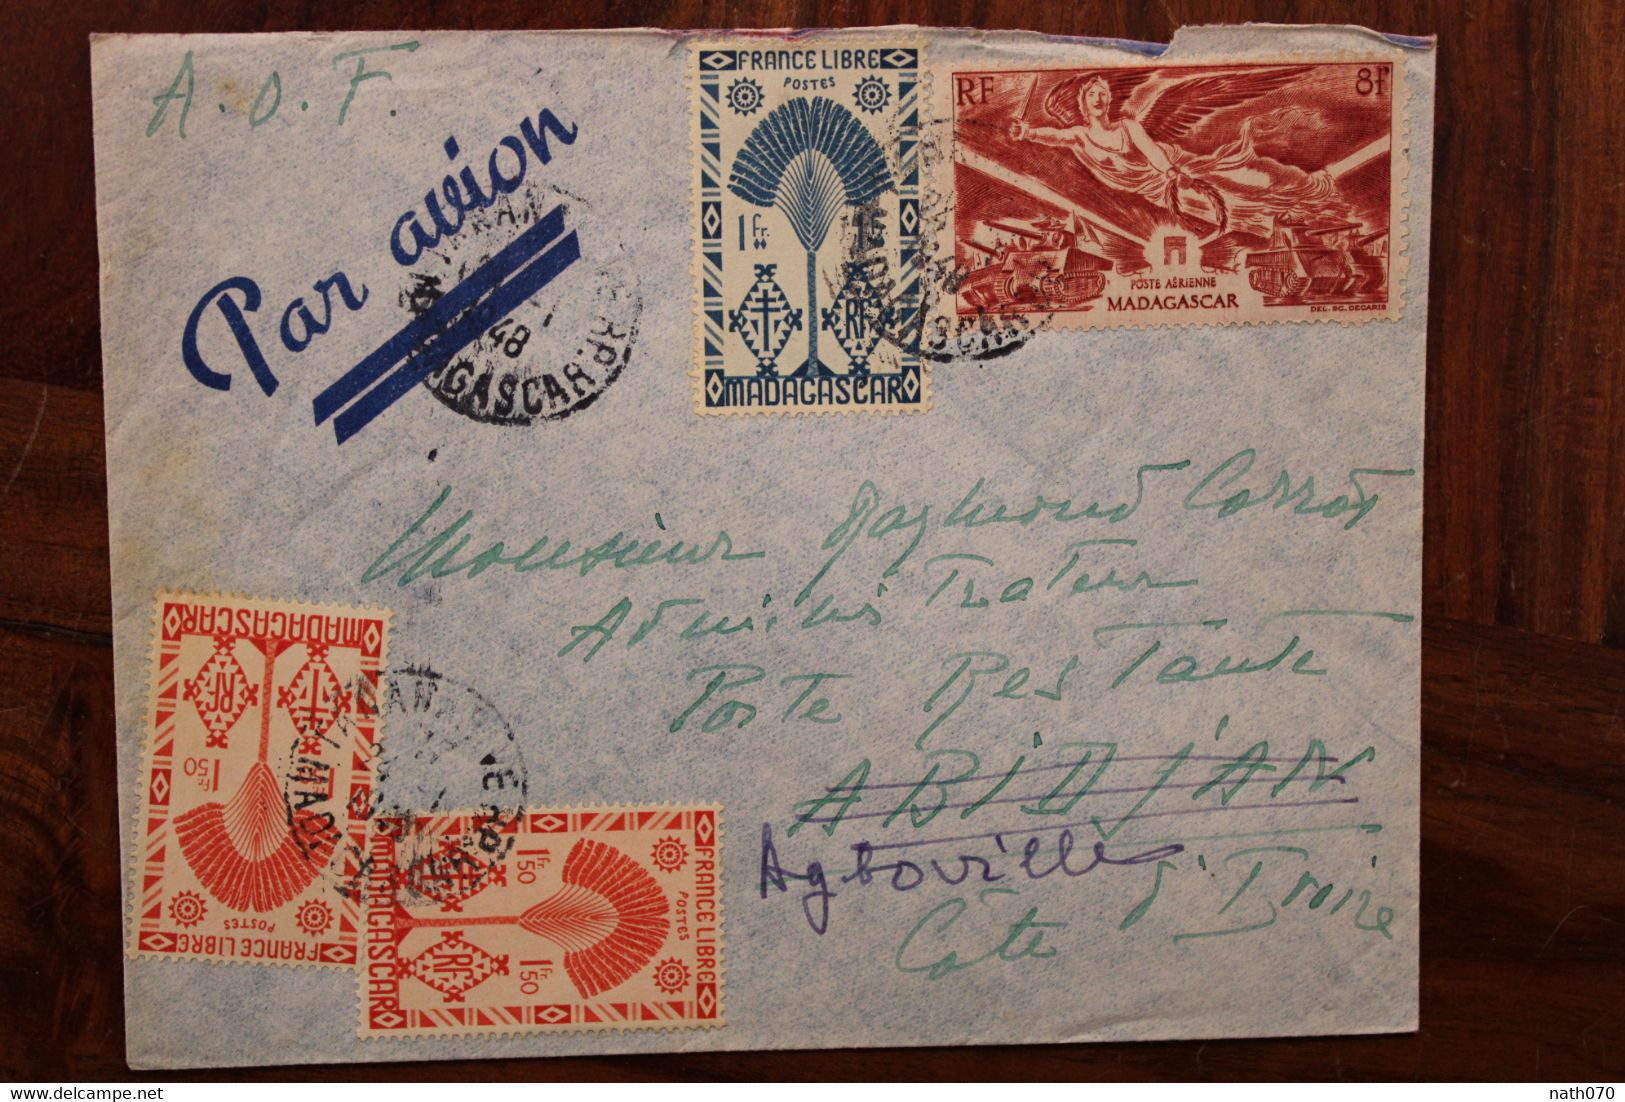 1948 Madagascar France Agboville Côte D'Ivoire Cover Air Mail Poste Aerienne - Covers & Documents